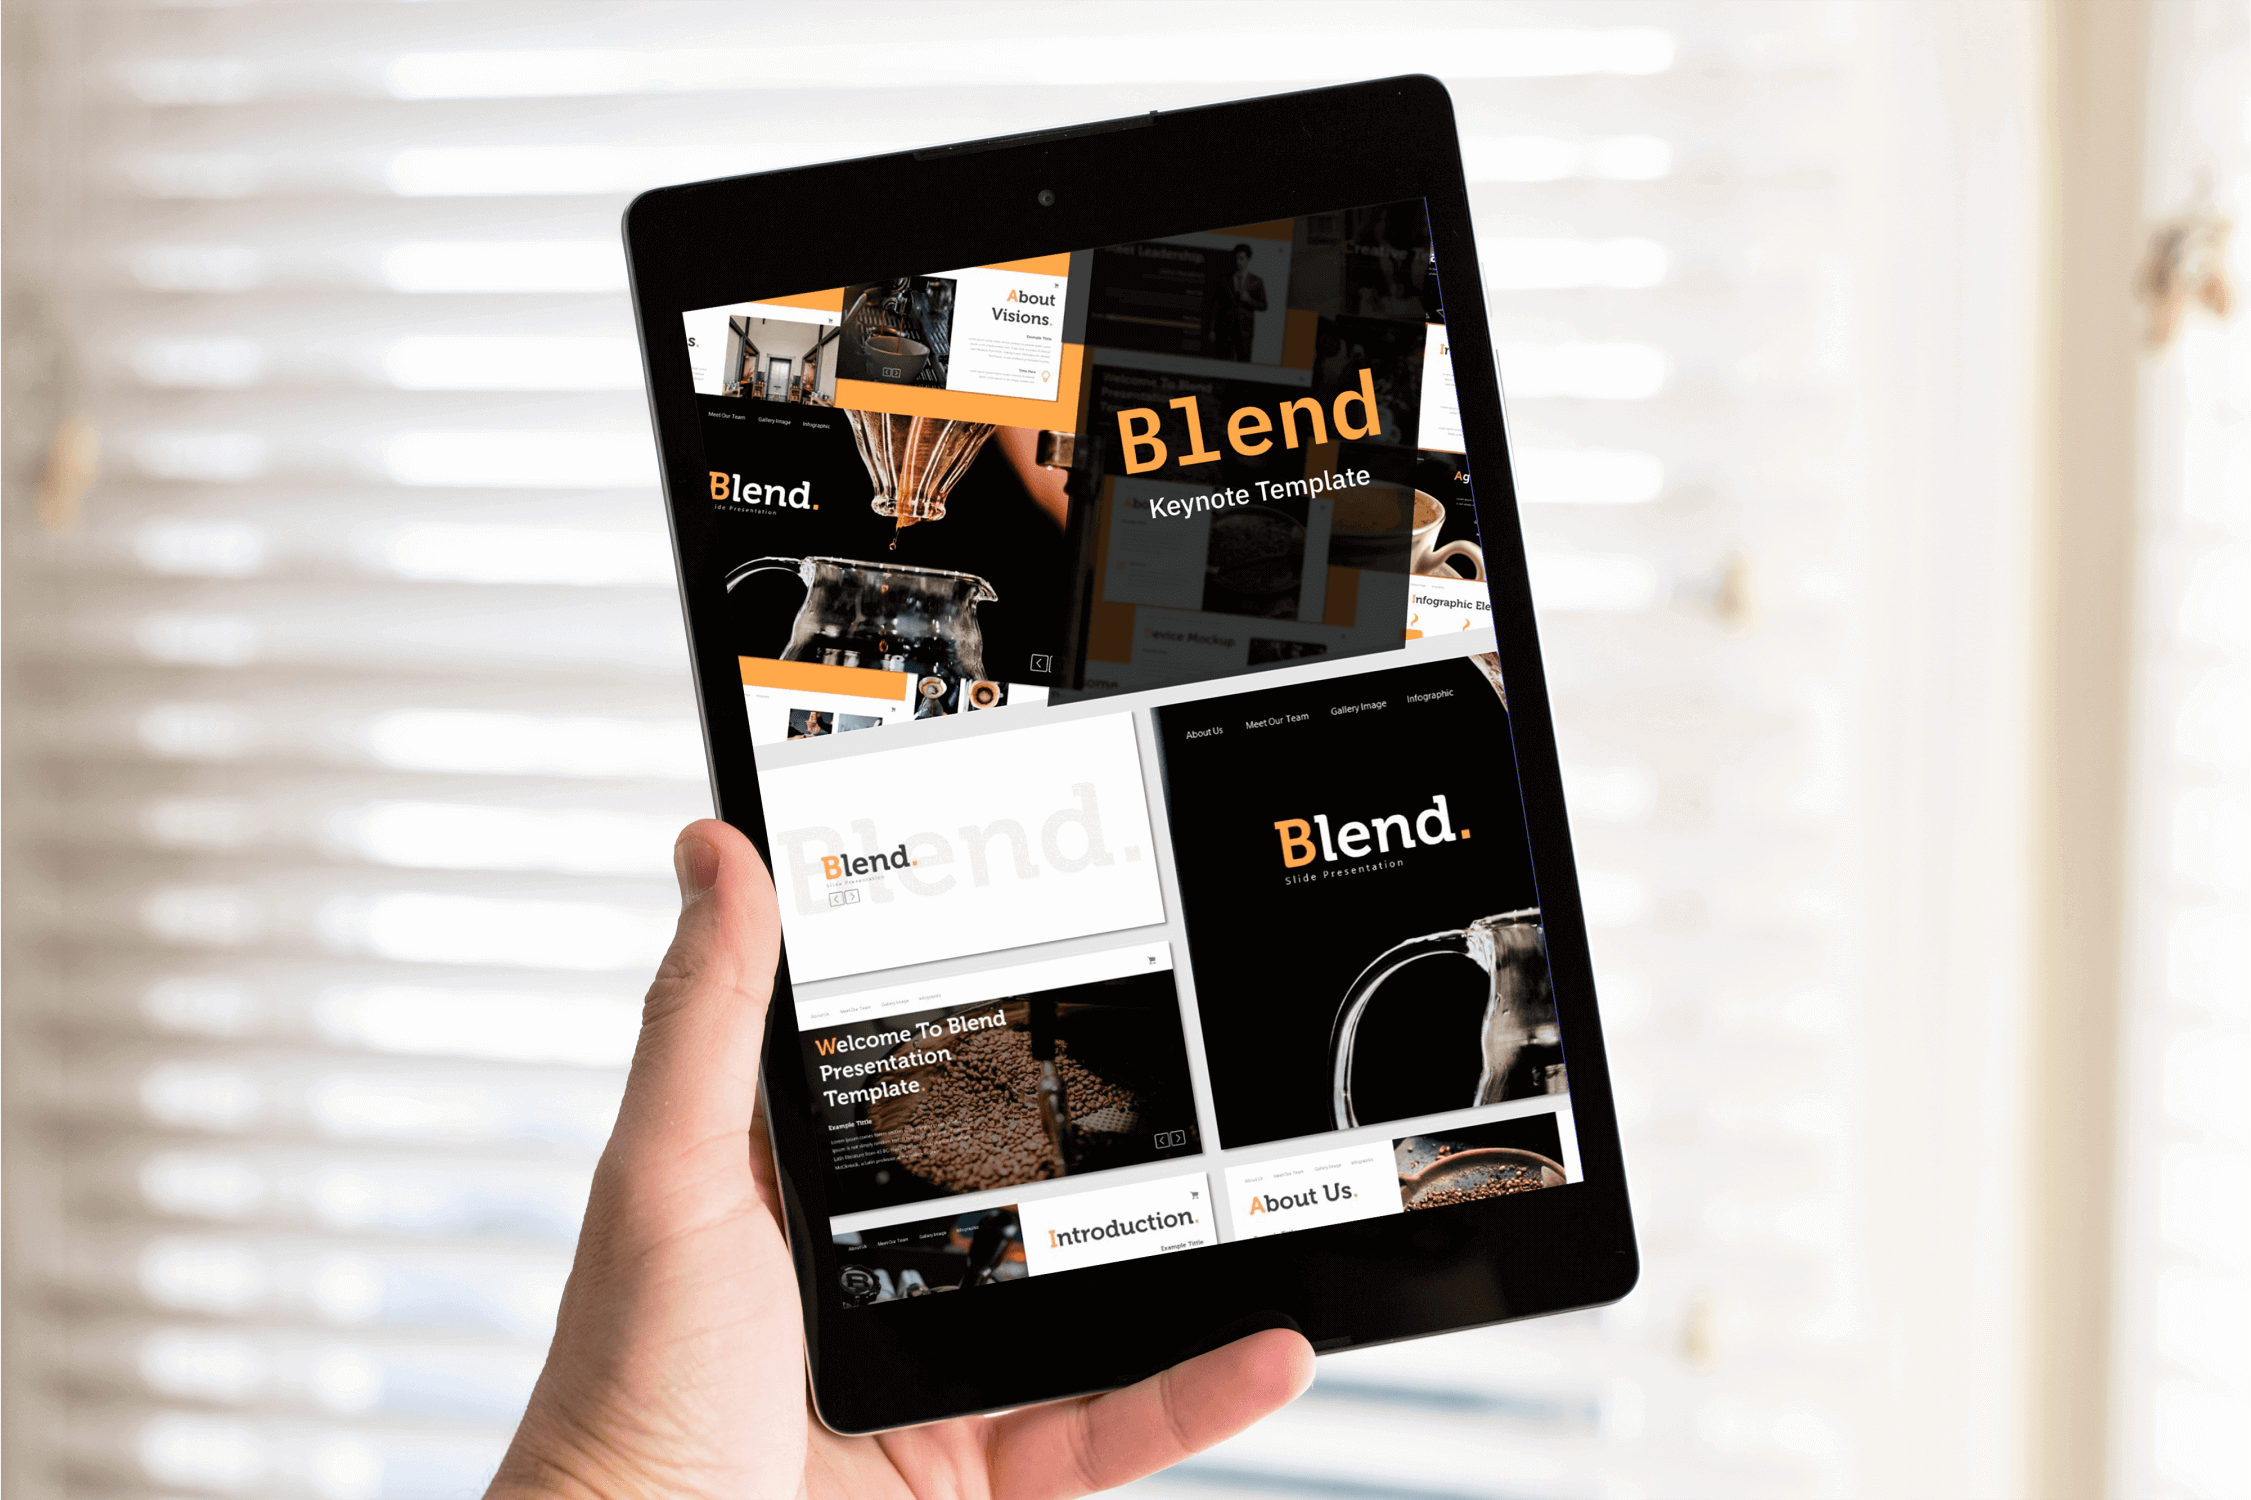 Preview Blend Keynote Template on Tablet.